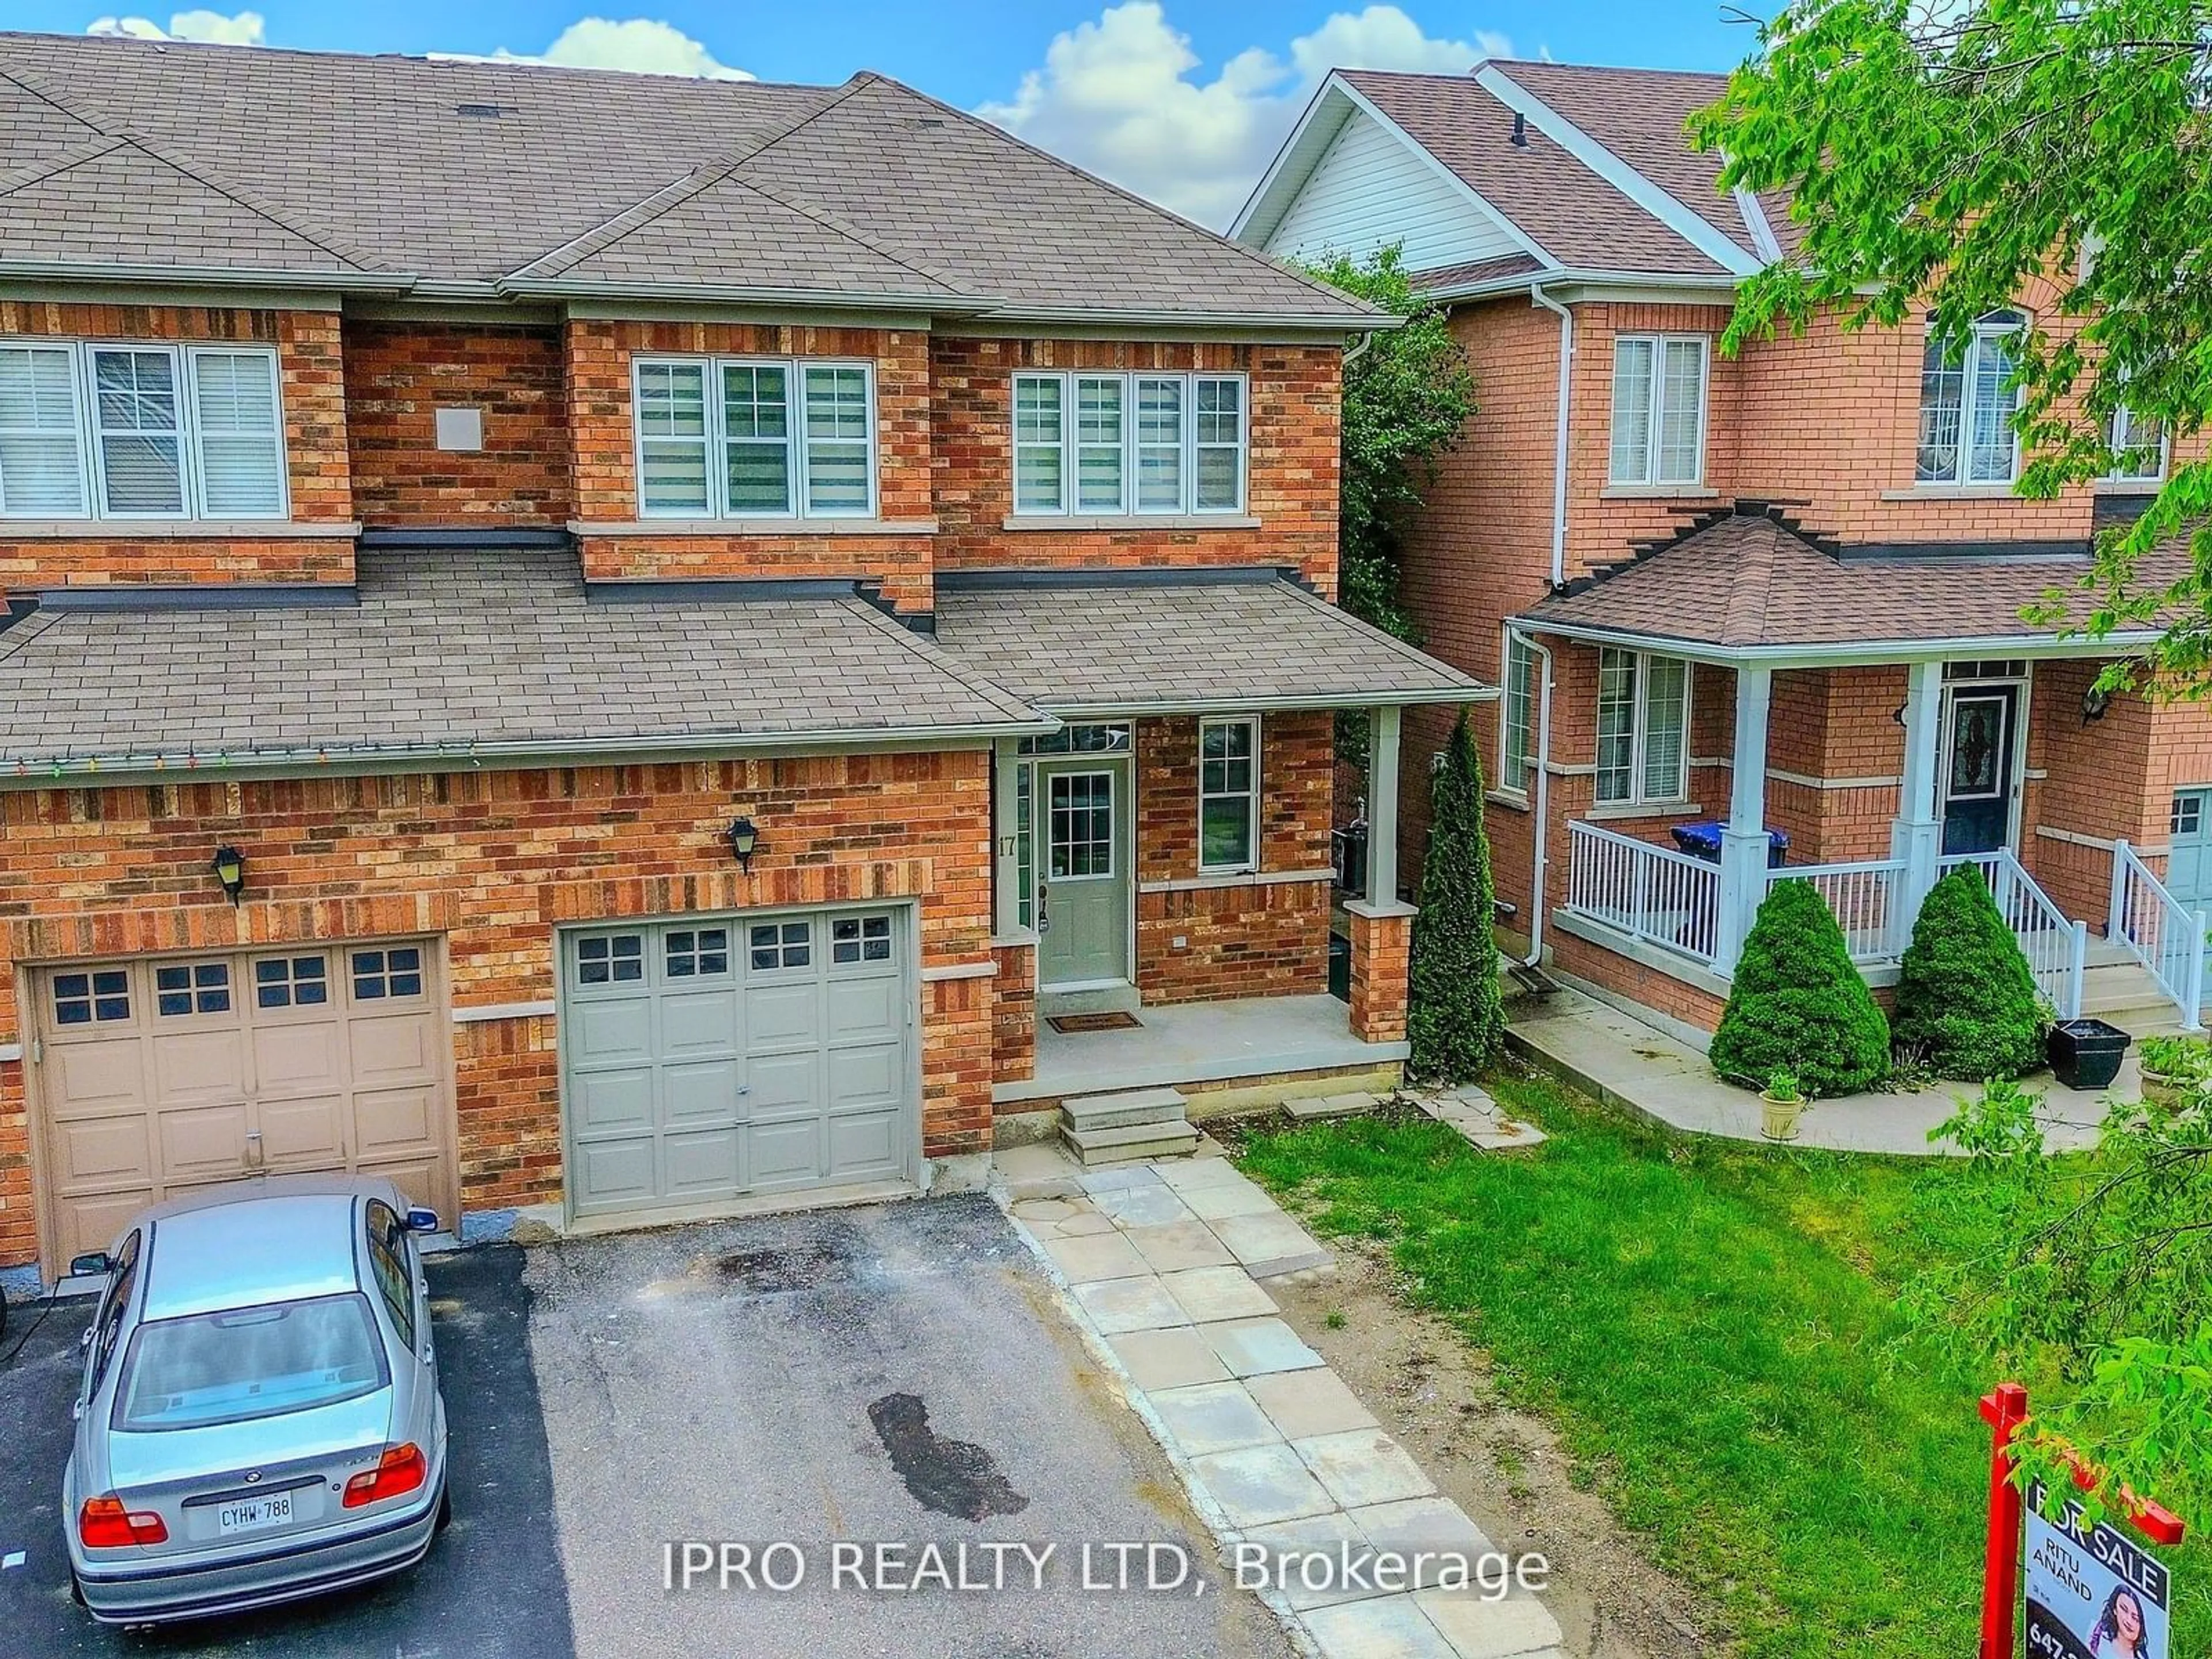 Home with brick exterior material for 17 Prudhomme Dr, Brampton Ontario L6R 0H2